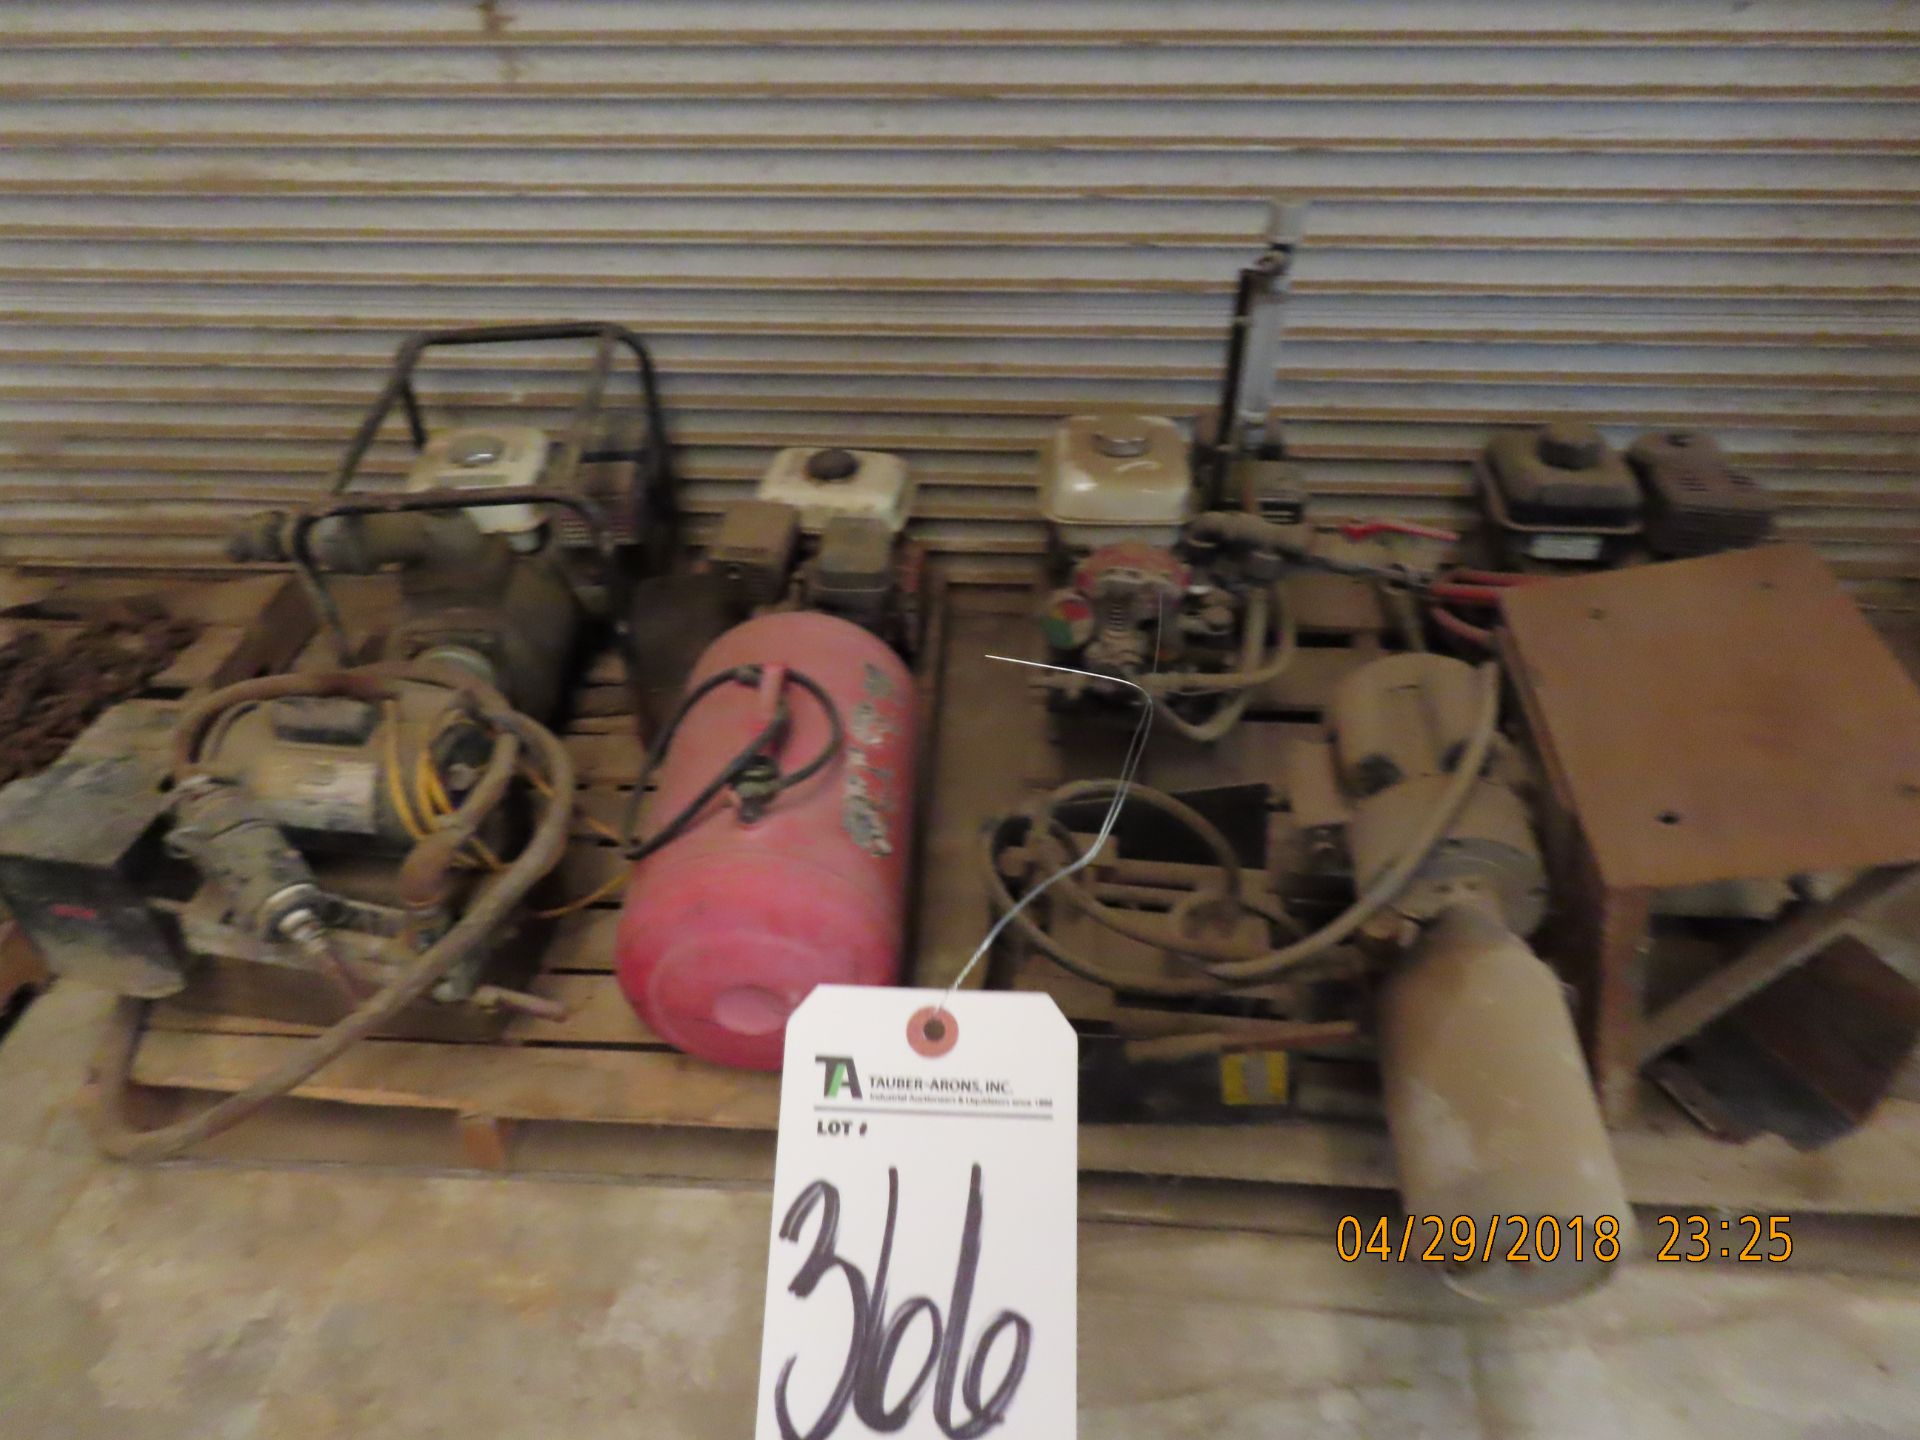 (Lot) Mowers, Pallet Jacks, Pipe Fittings Electrical Boxes - Image 2 of 3